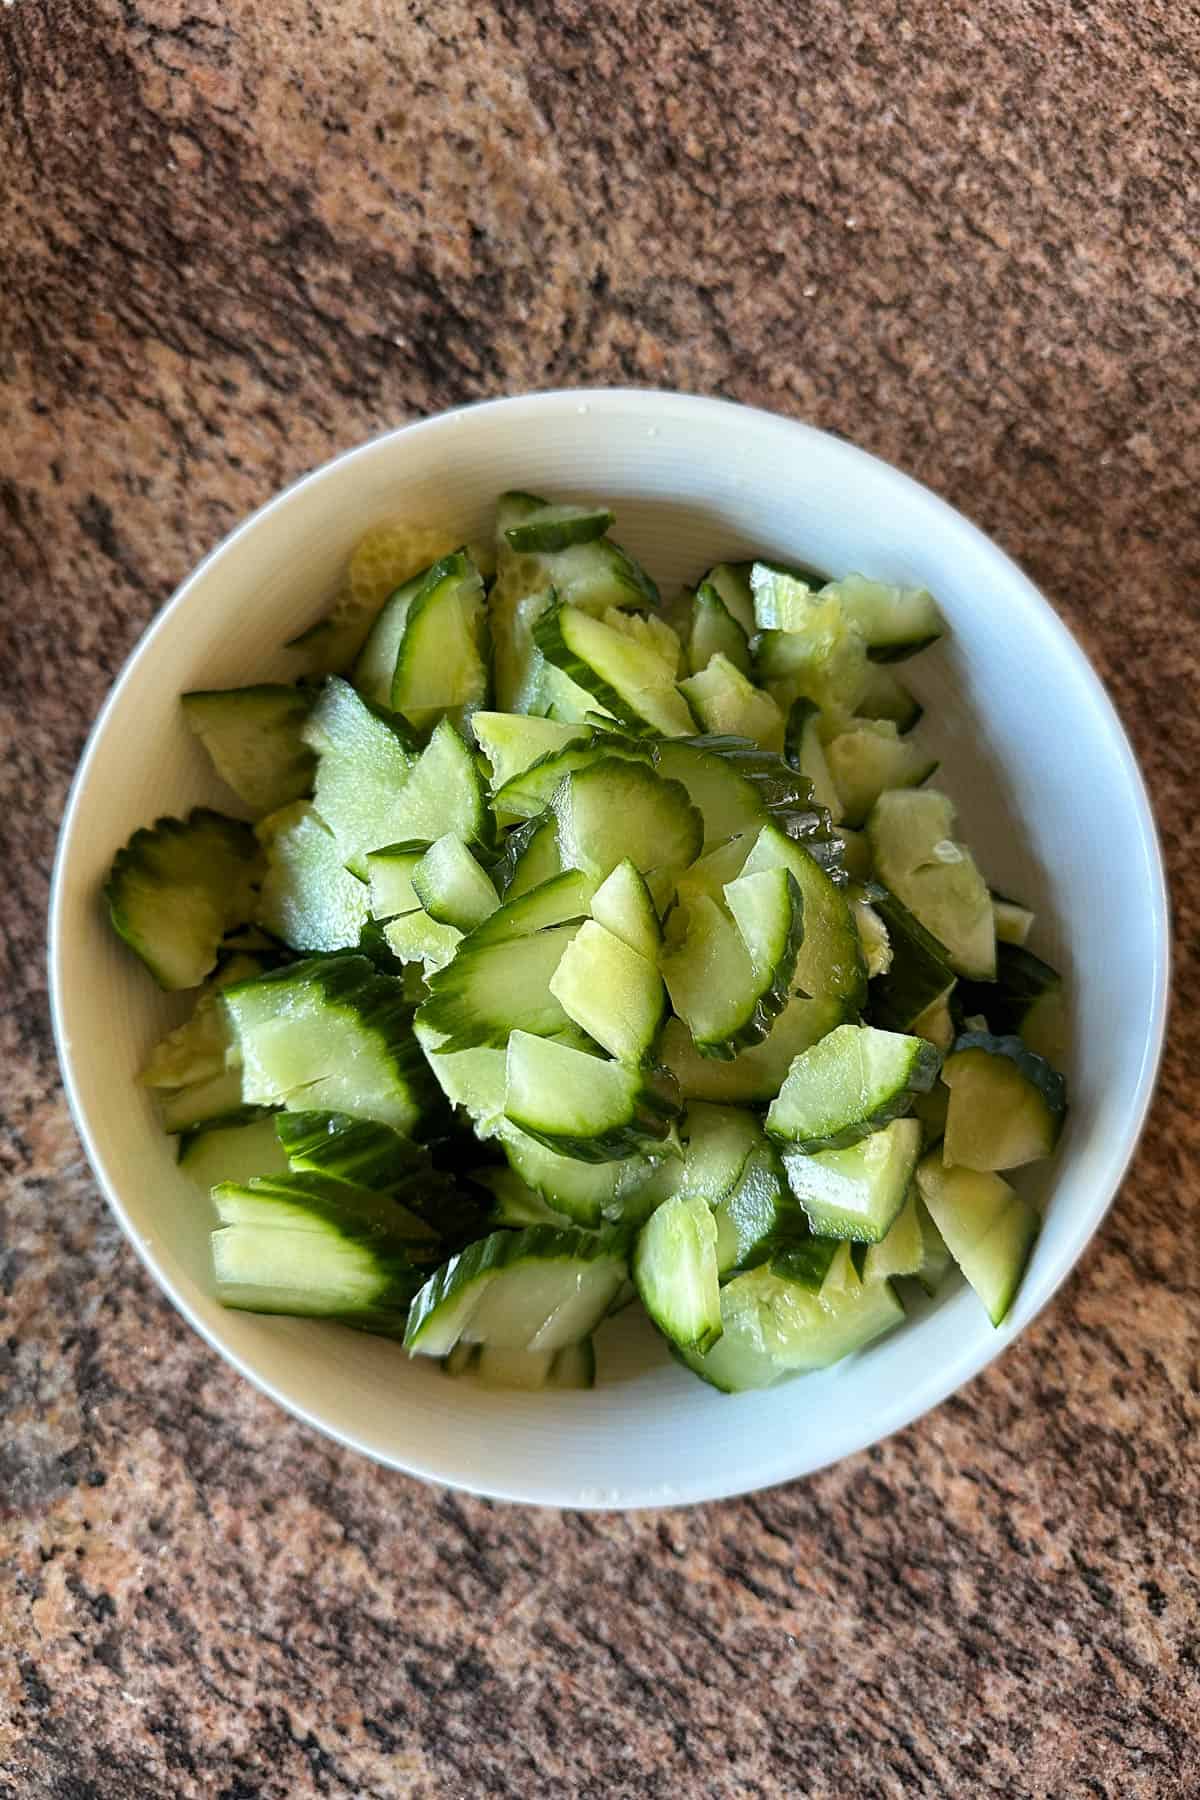 Smashed cucumbers.